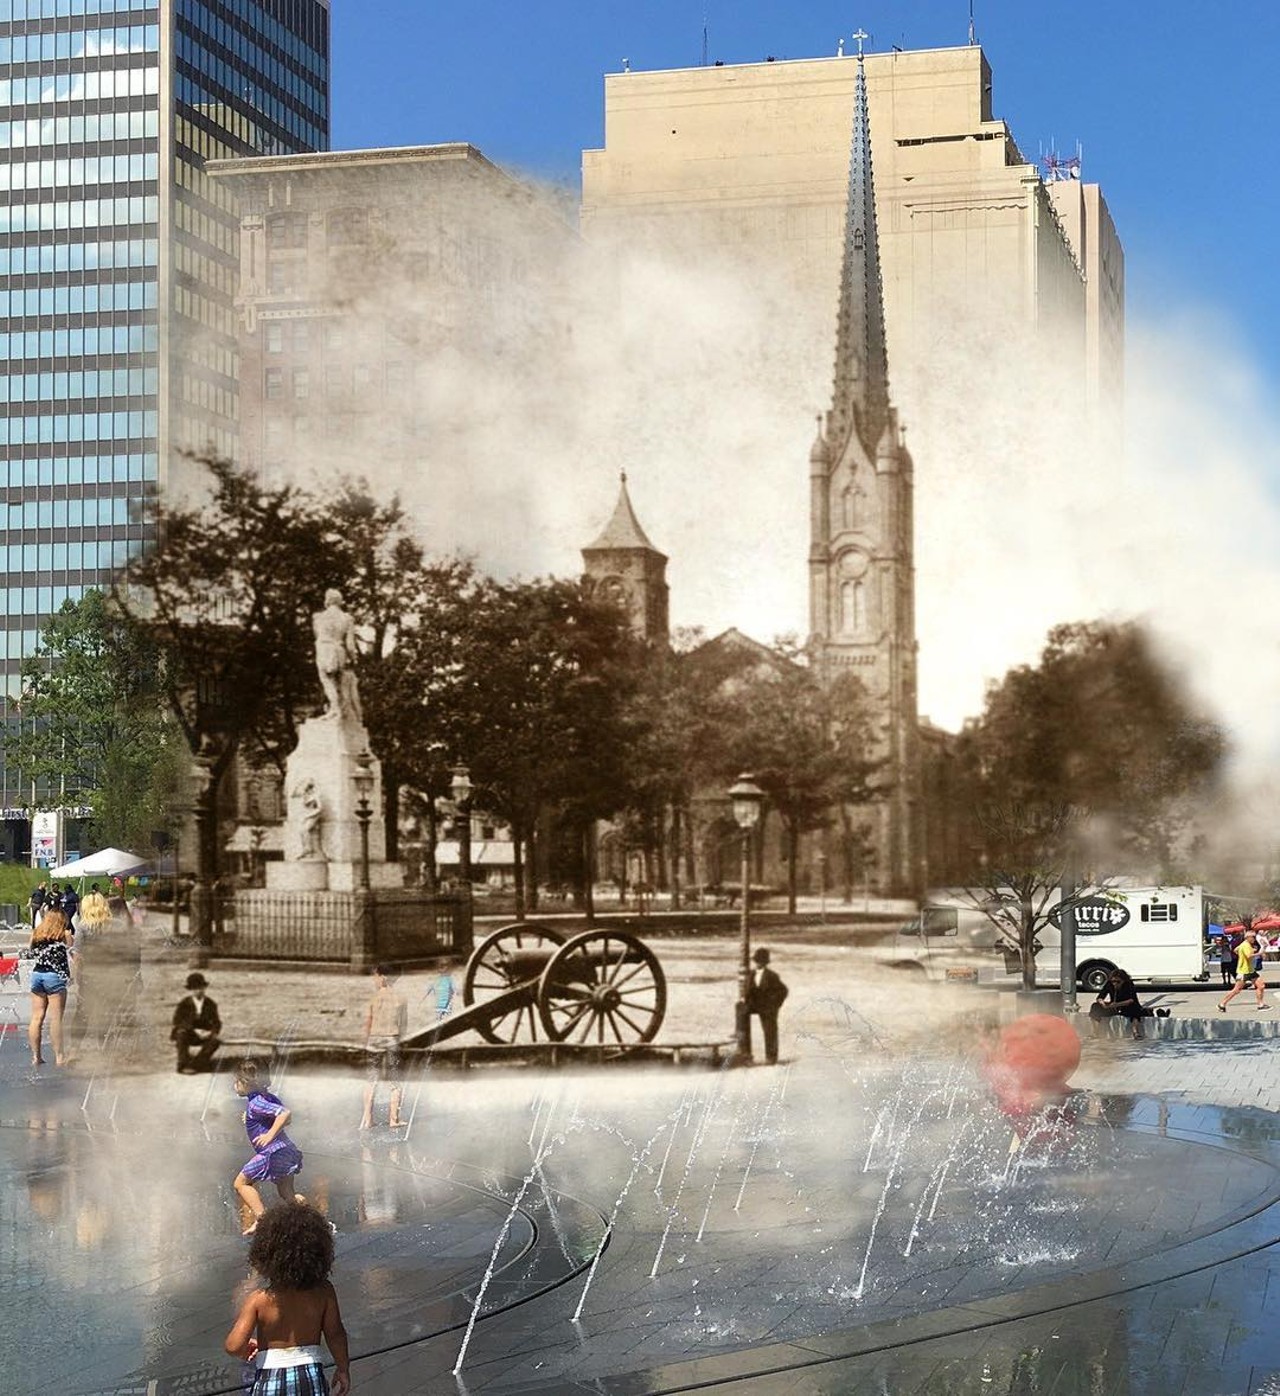 Cleveland, 1876/2016 - intersection of Ontario and Superior in Public Square.